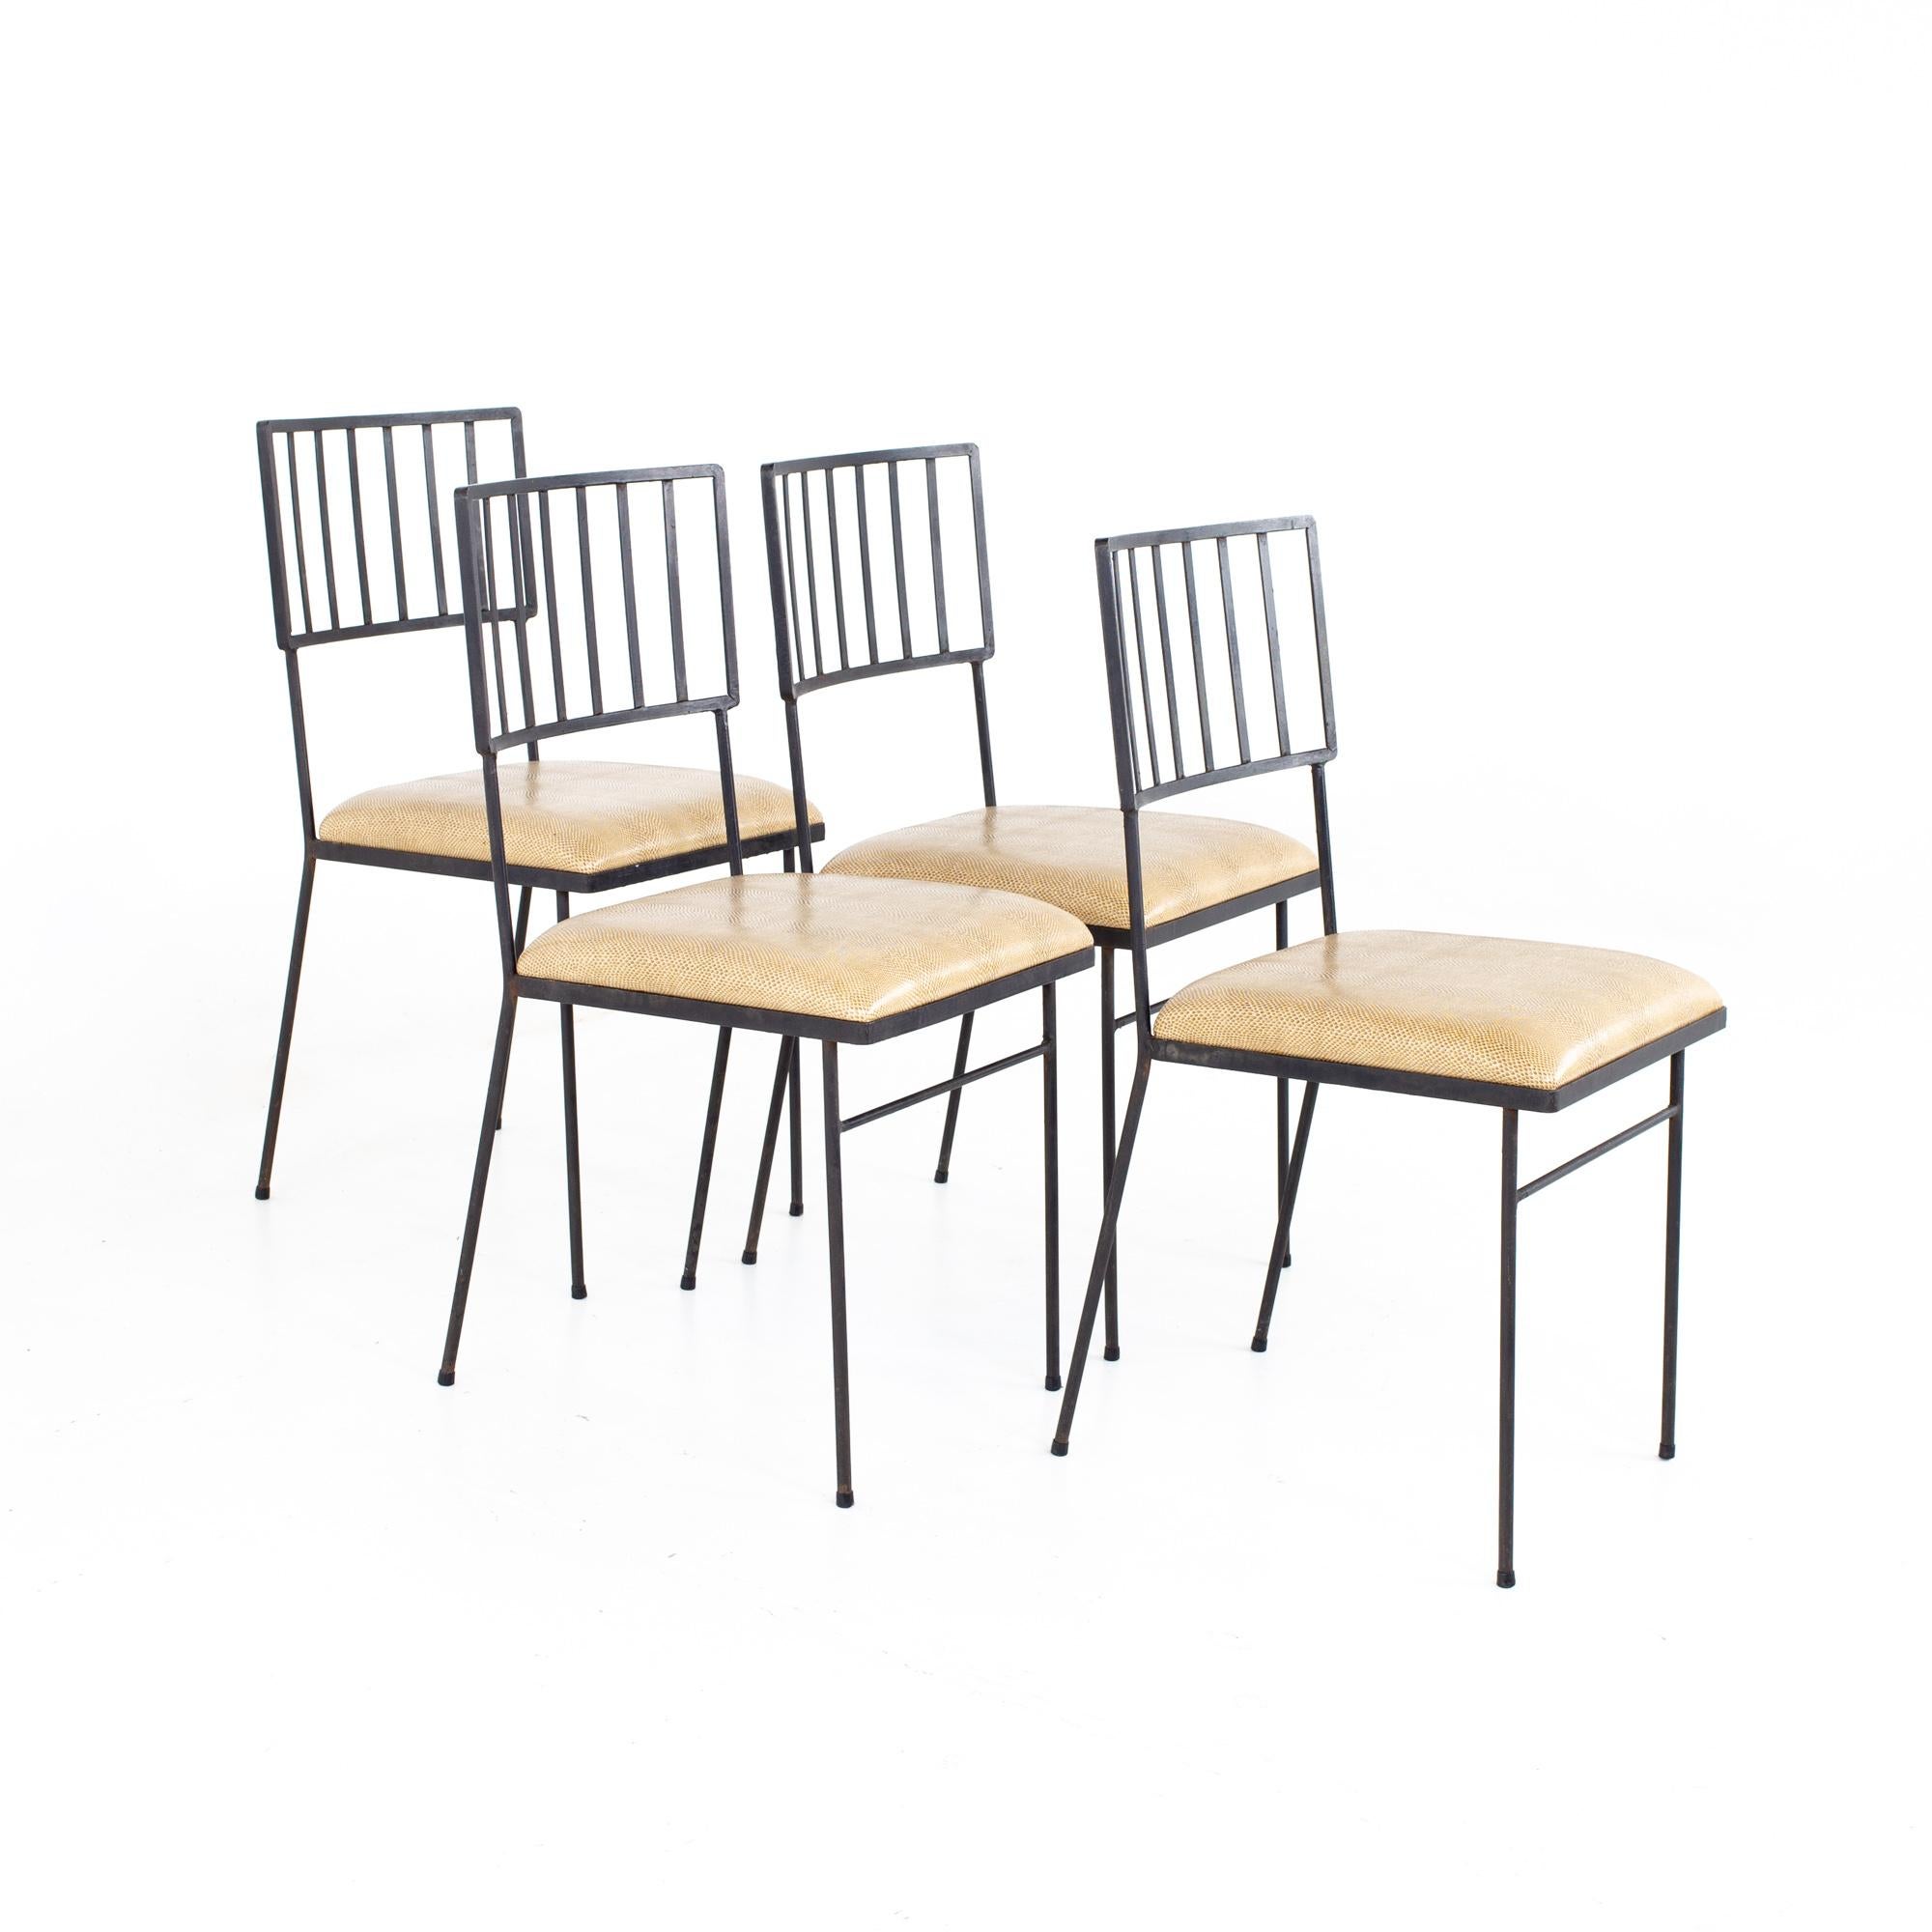 American Milo Baughman For Pacific Iron Works Mid Century Chairs - Set of 4